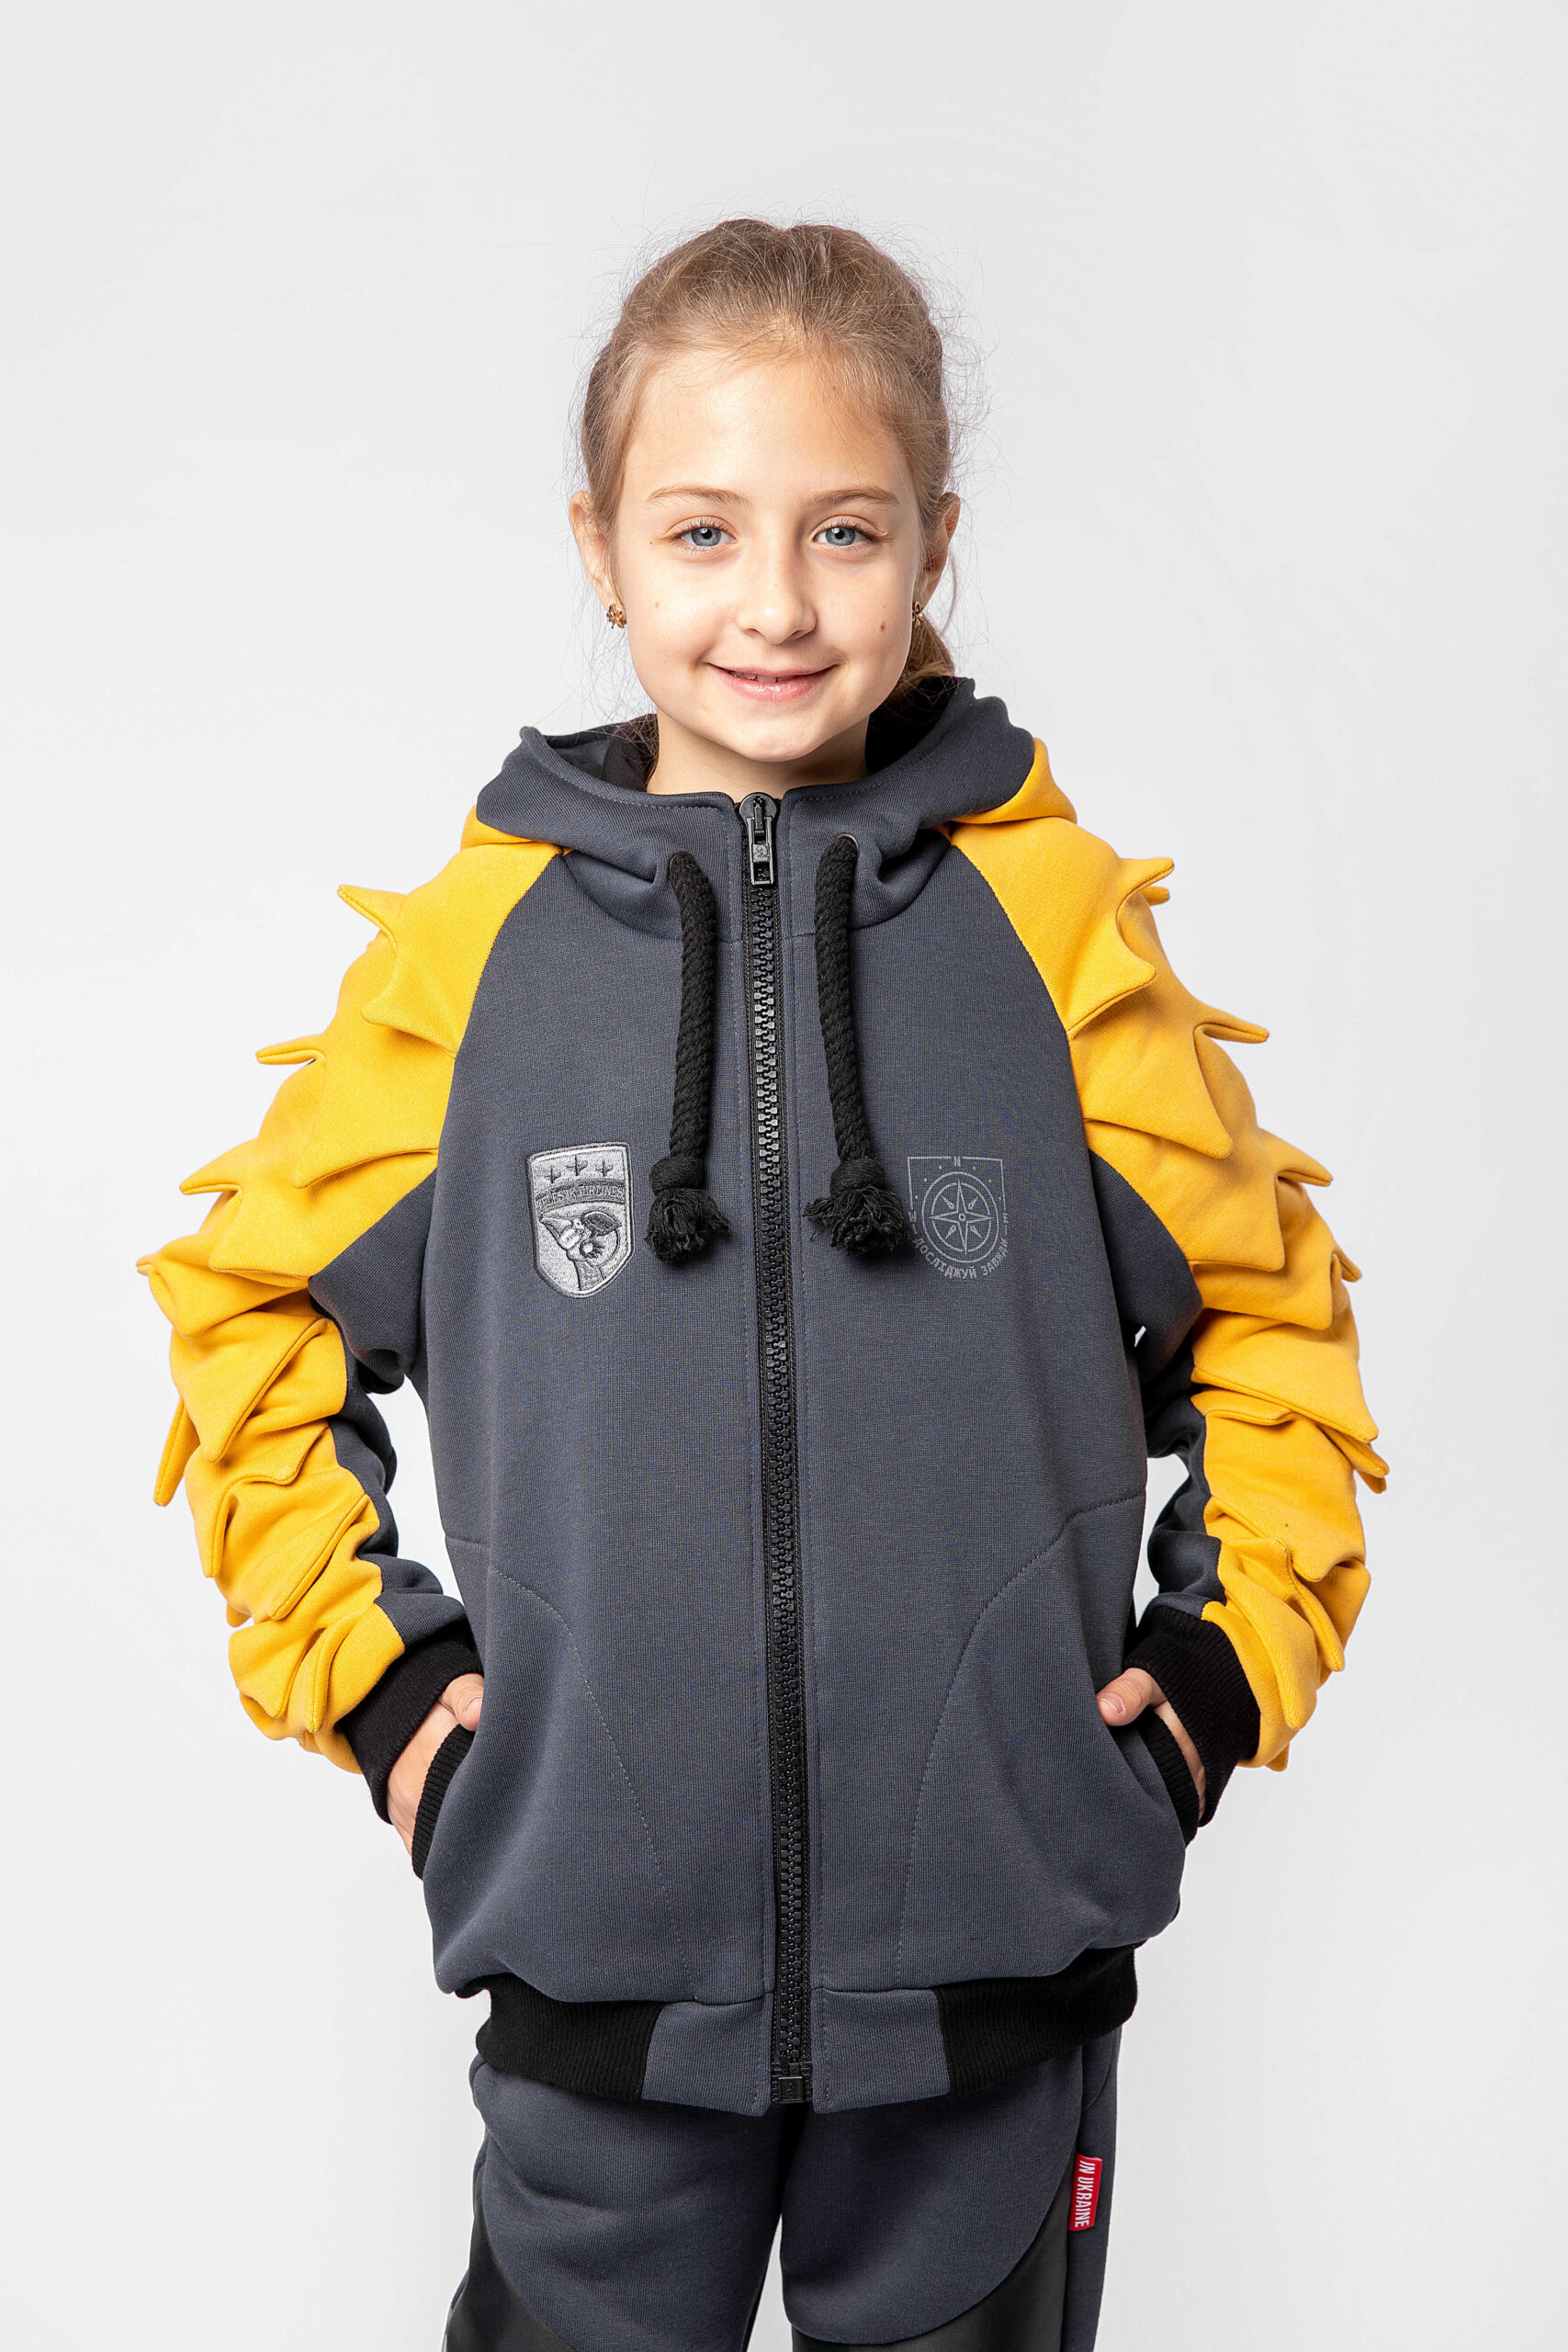 Kid`s Hoodie Pangolin. Color yellow. Hoodie: unisex, well suited for both boys and girls.